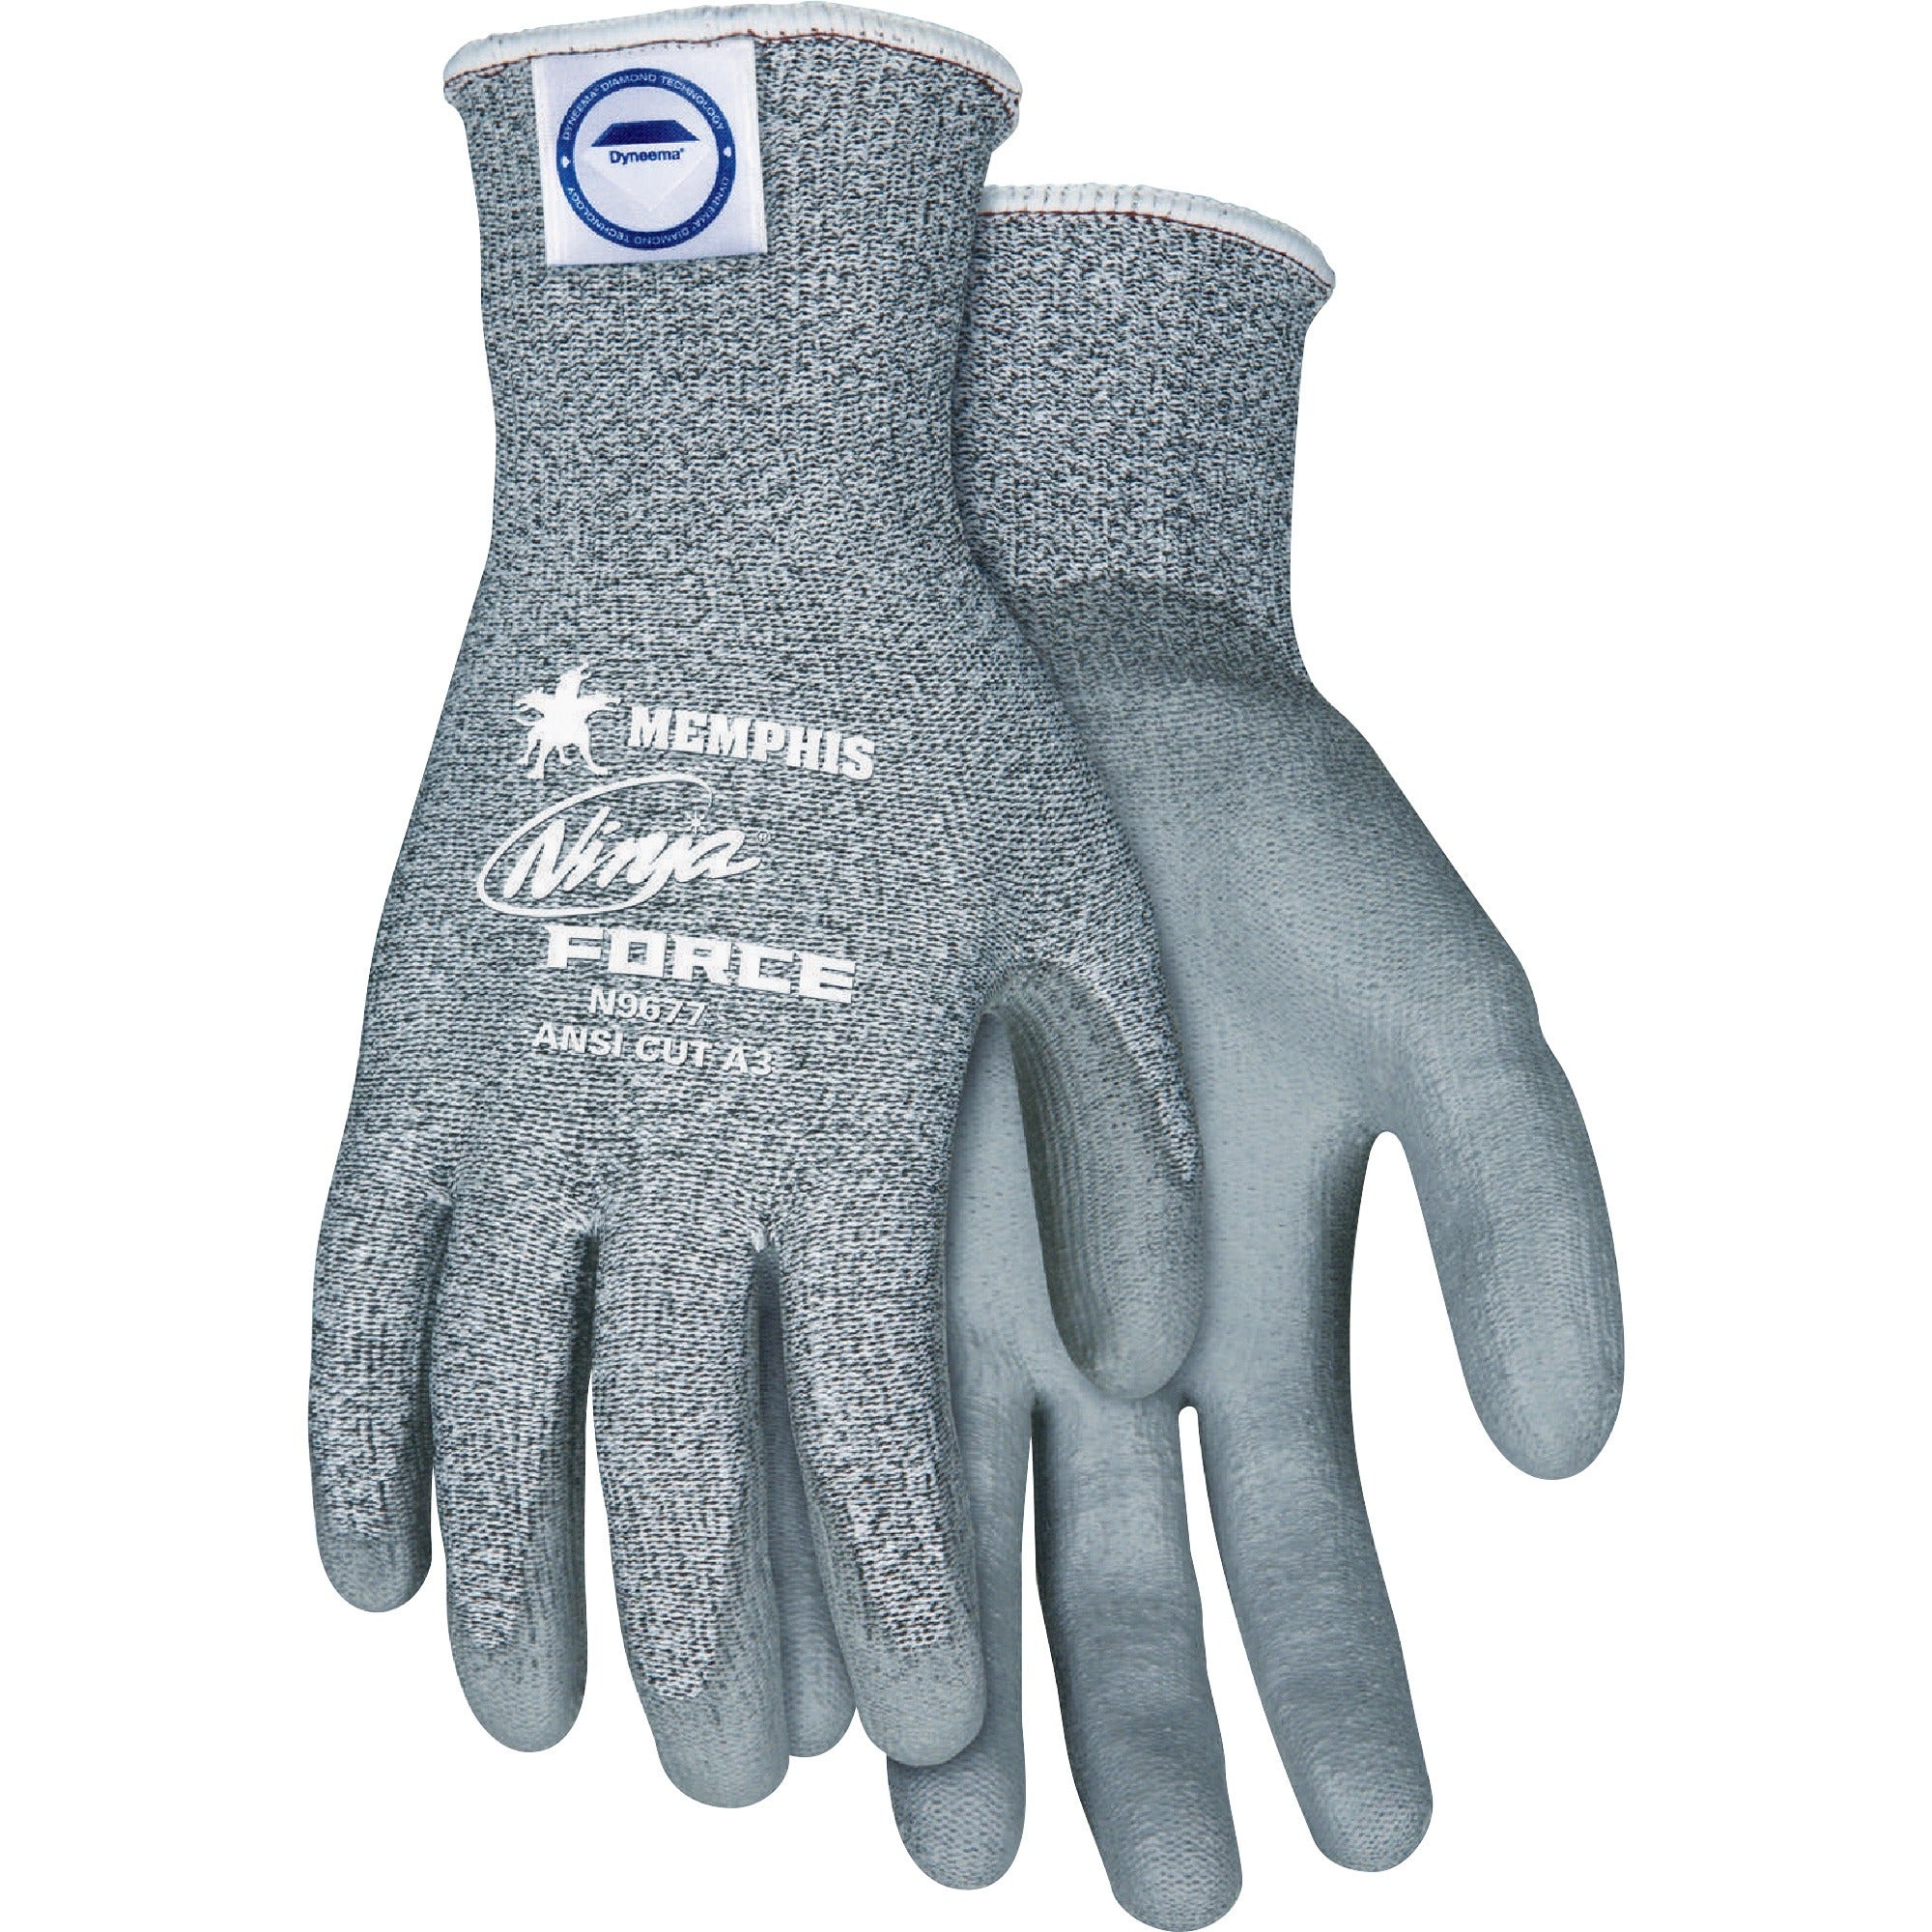 MCR Safety Ninja Force Fiberglass Shell Gloves - Small Size - Gray - Durable, Abrasion Resistant, Flexible, Cut Resistant, Tear Resistant - For Multipurpose - 1 / Pair